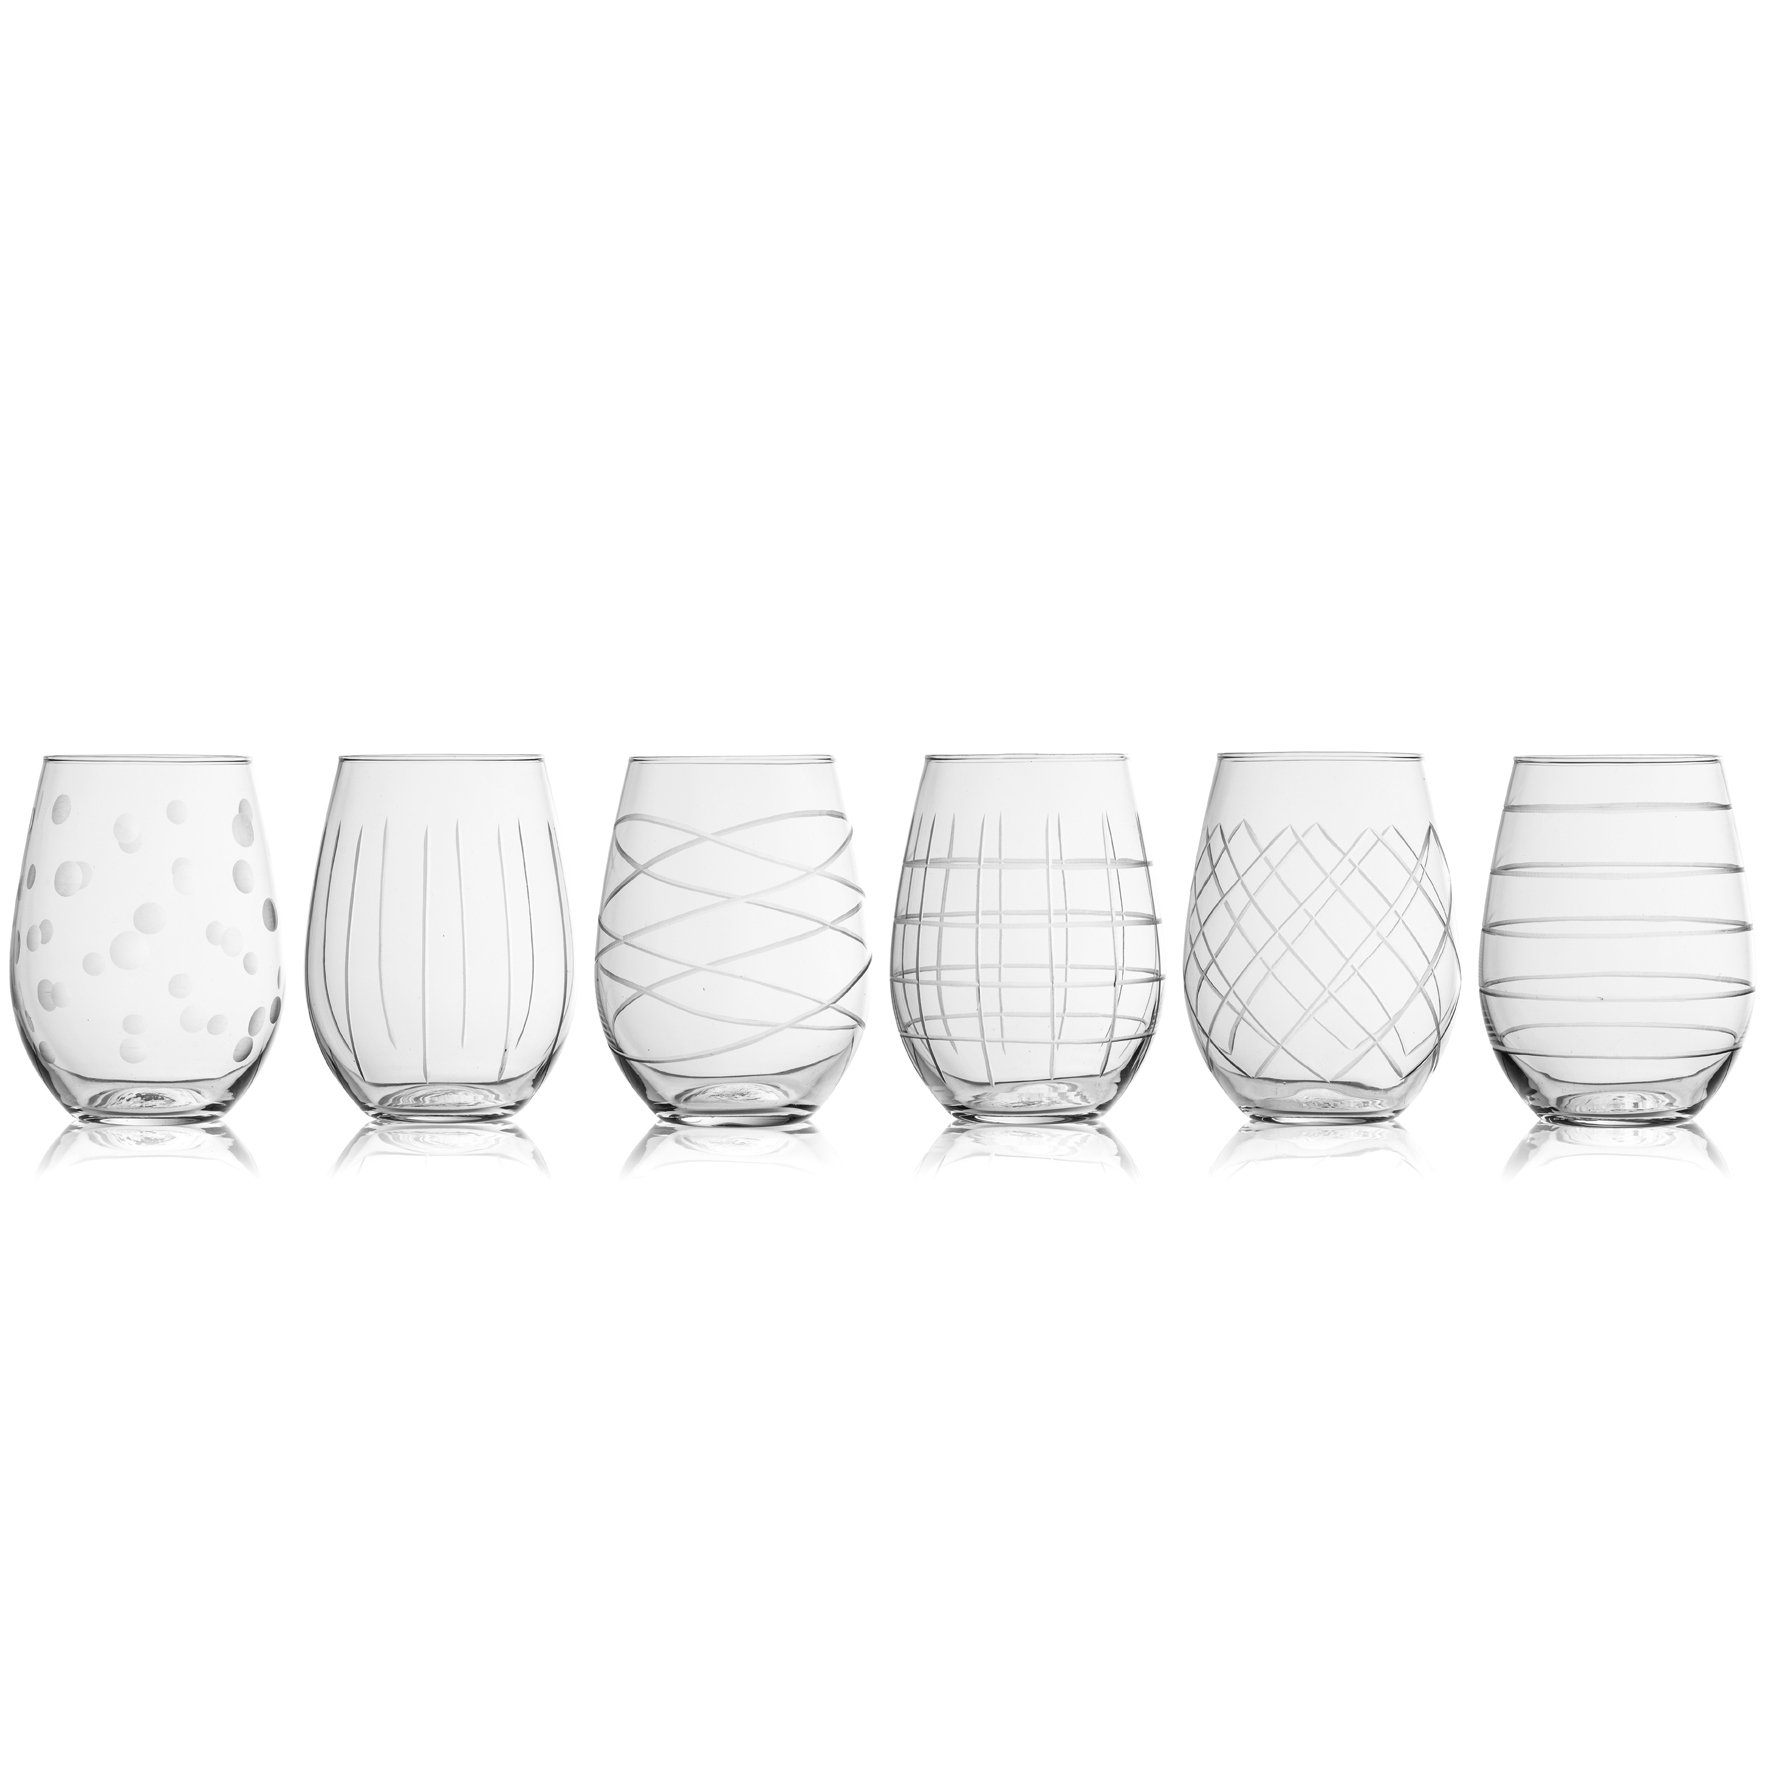 Fifth Avenue crystal glasses Medallion Stemless Wine goblets, 6 count (Pack of 1), clear